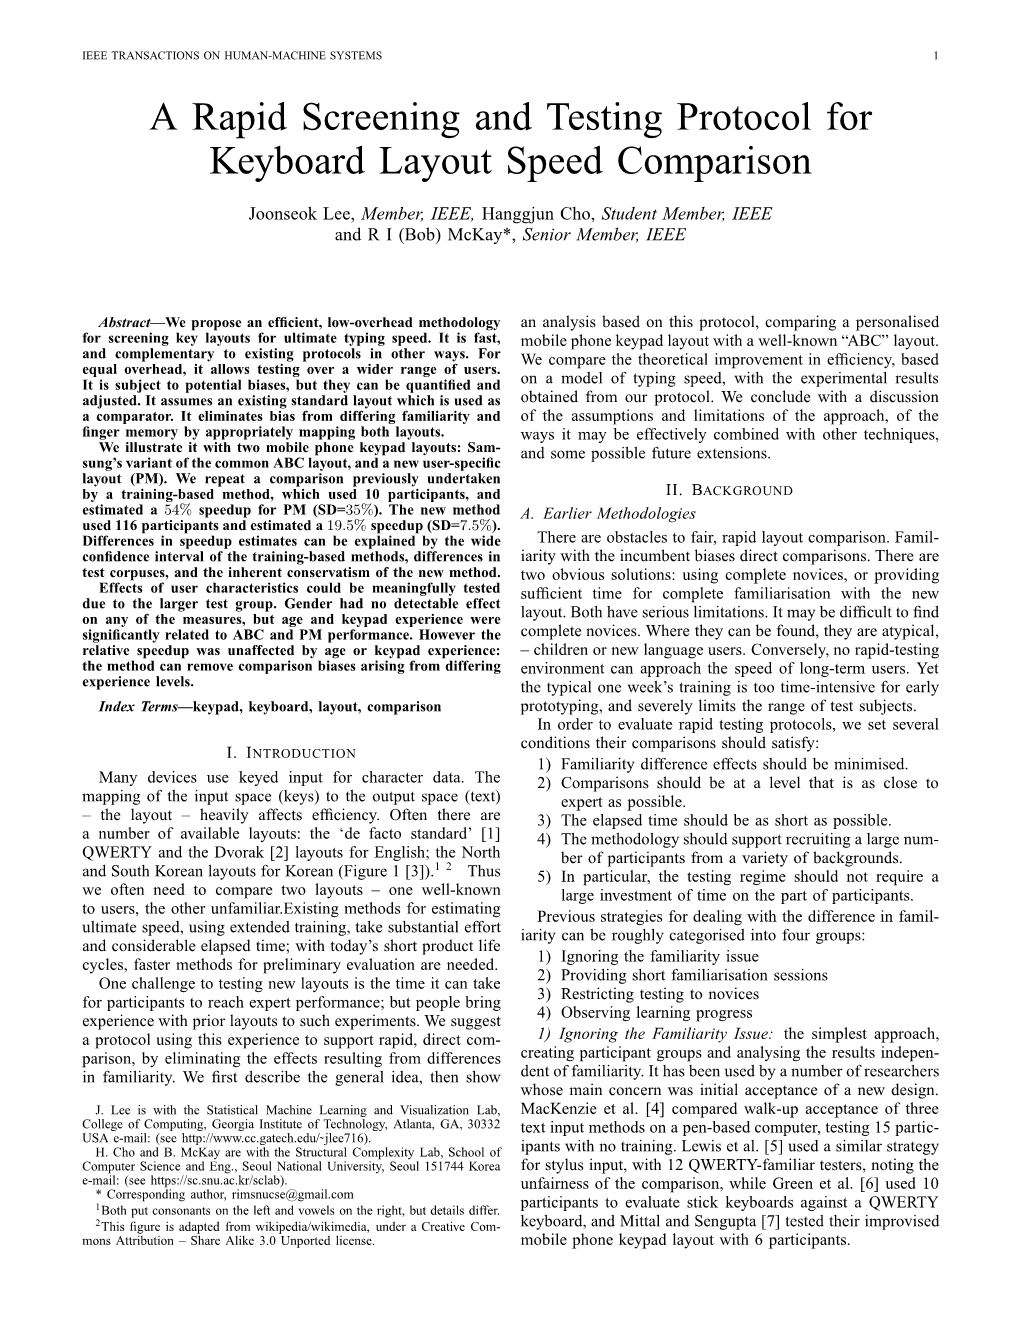 A Rapid Screening and Testing Protocol for Keyboard Layout Speed Comparison